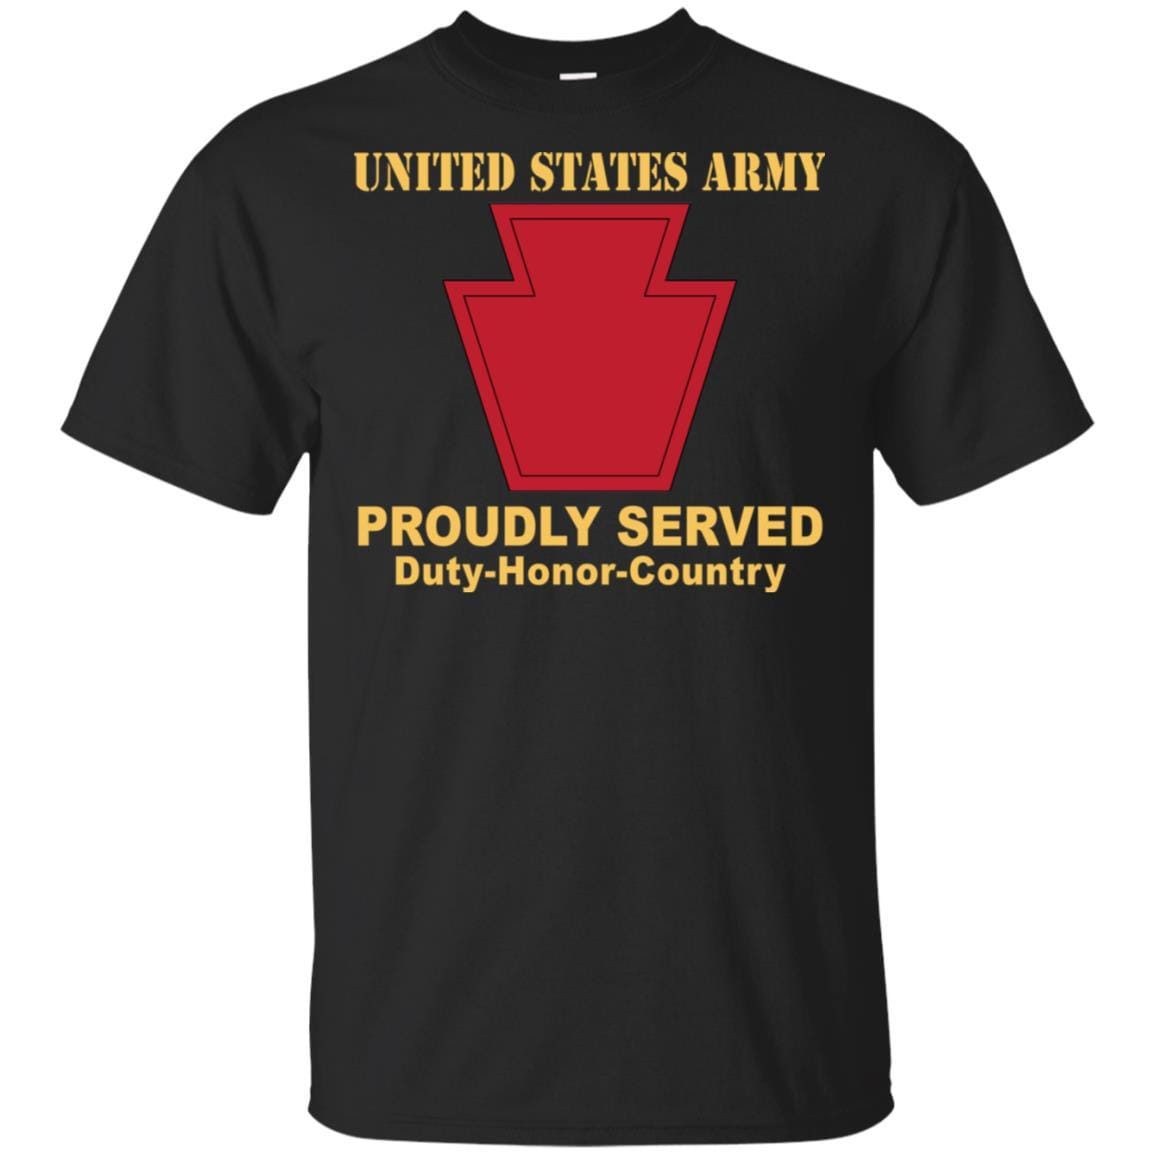 US ARMY 28TH INFANTRY DIVISION - Proudly Served T-Shirt On Front For Men-TShirt-Army-Veterans Nation